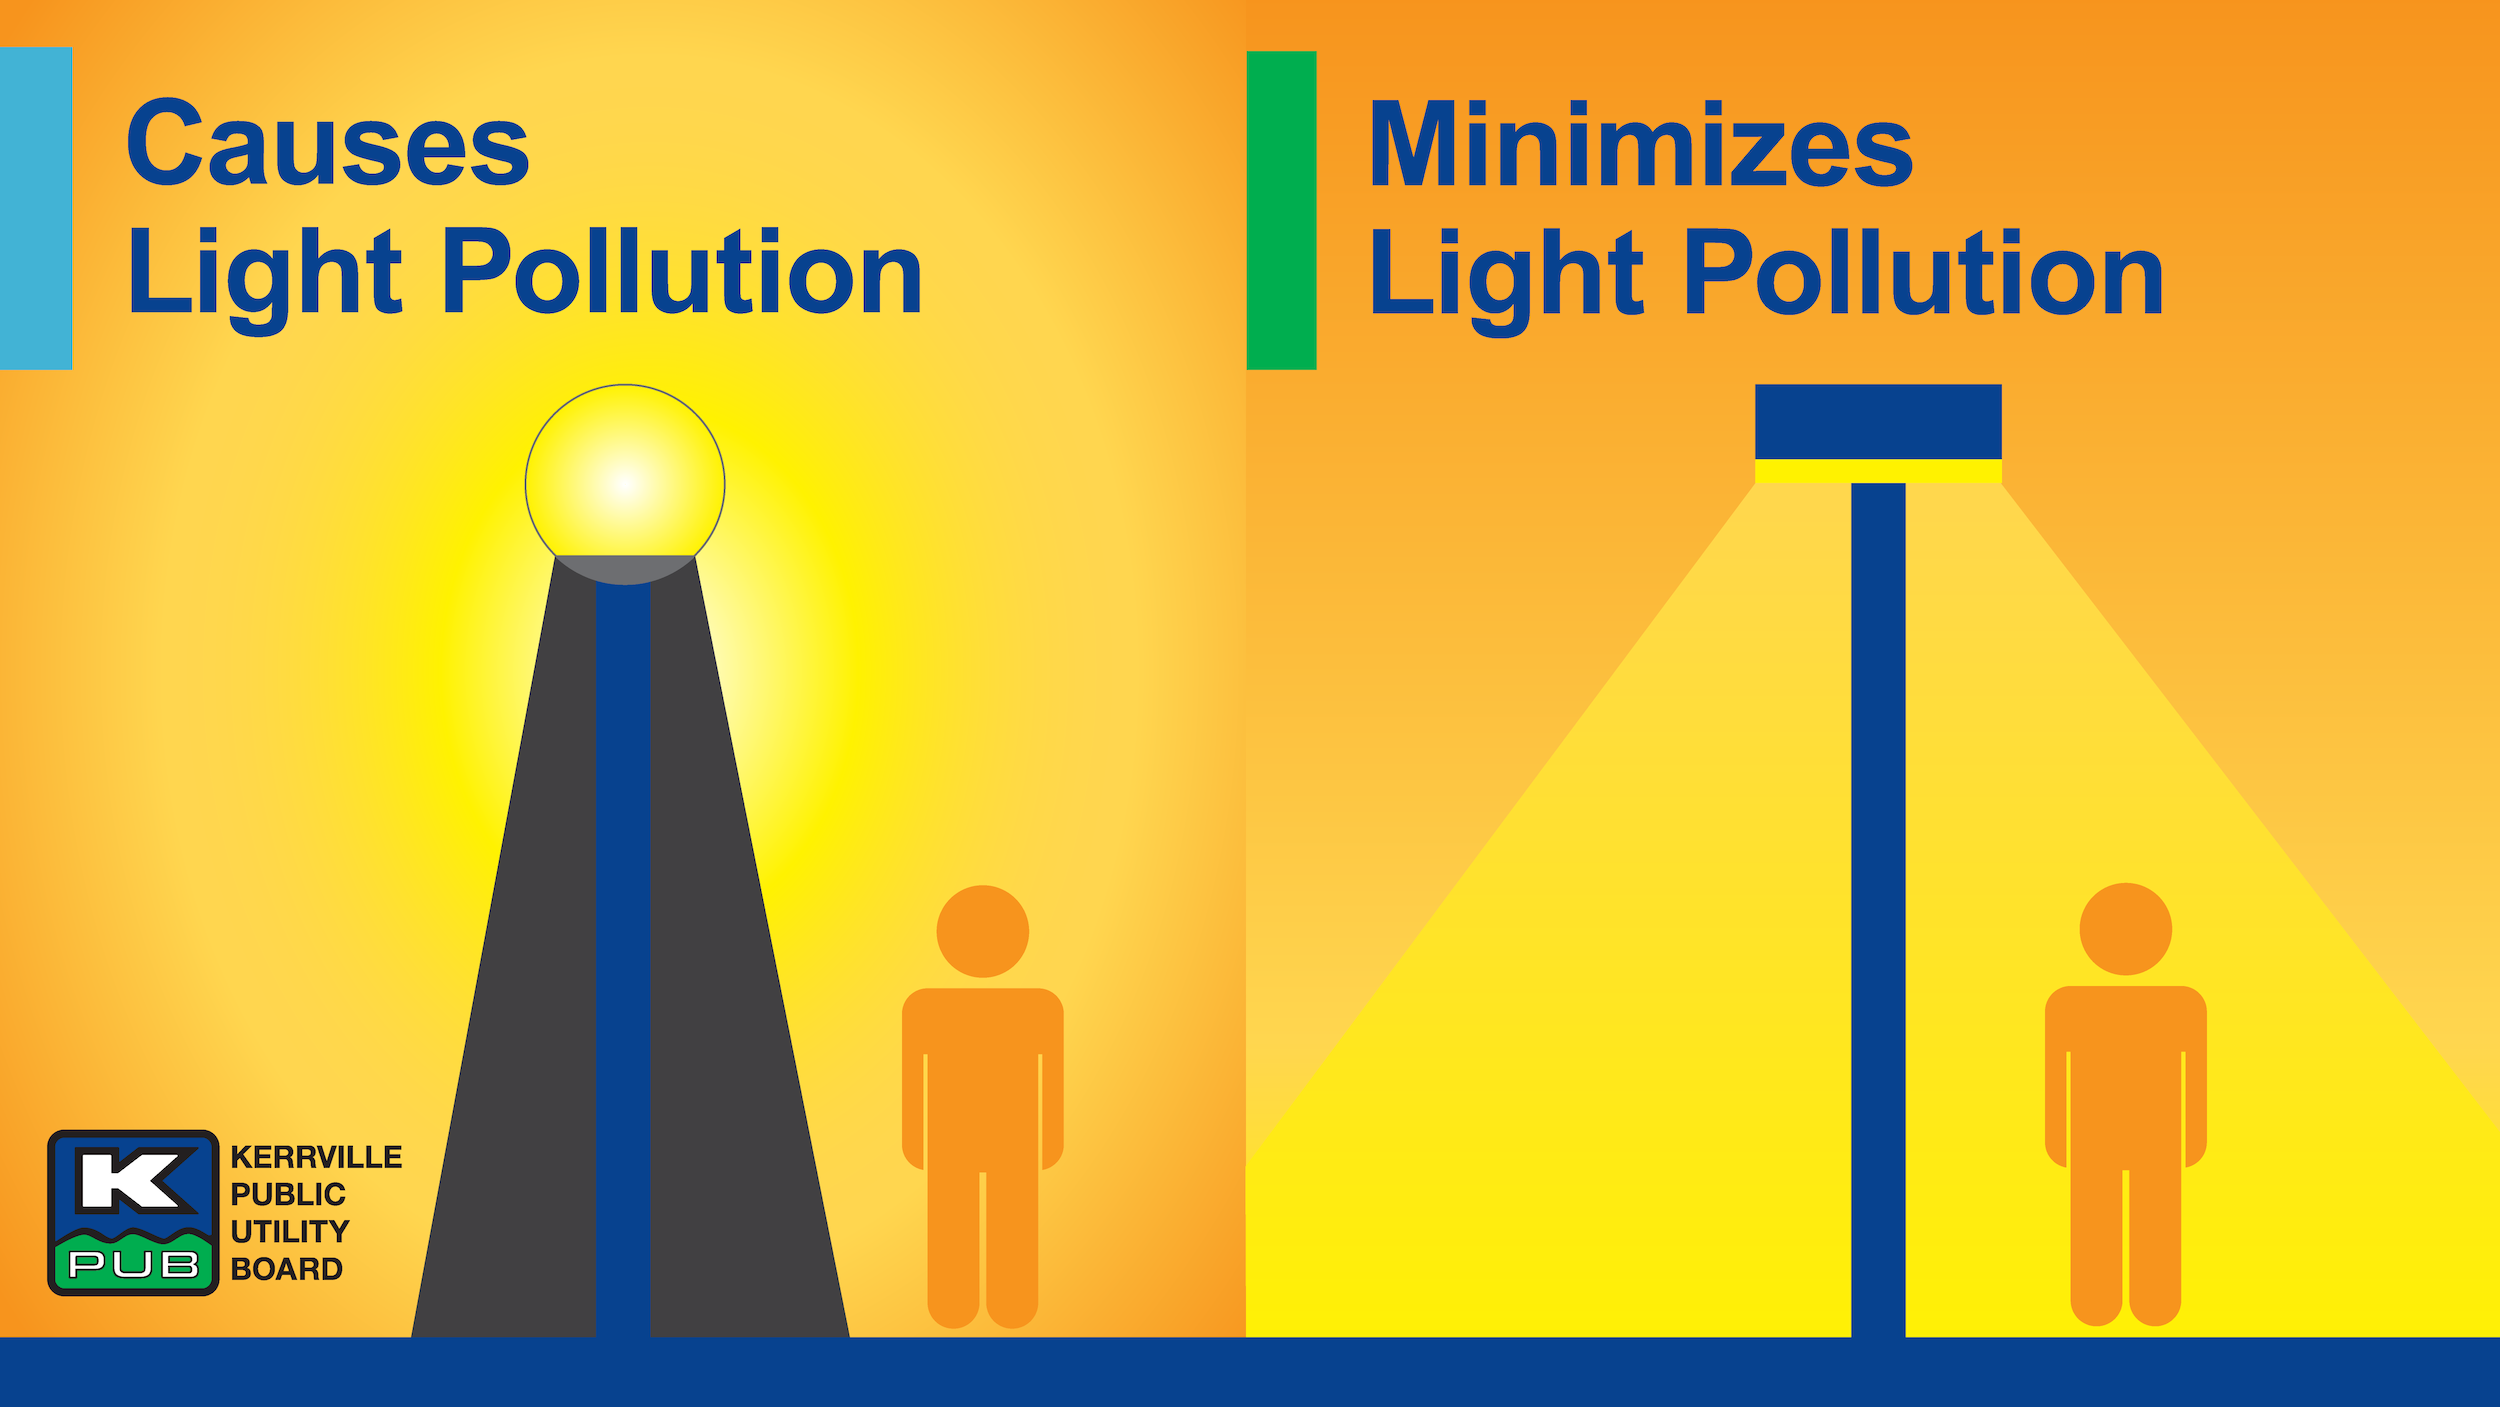 Causes of Light Pollution